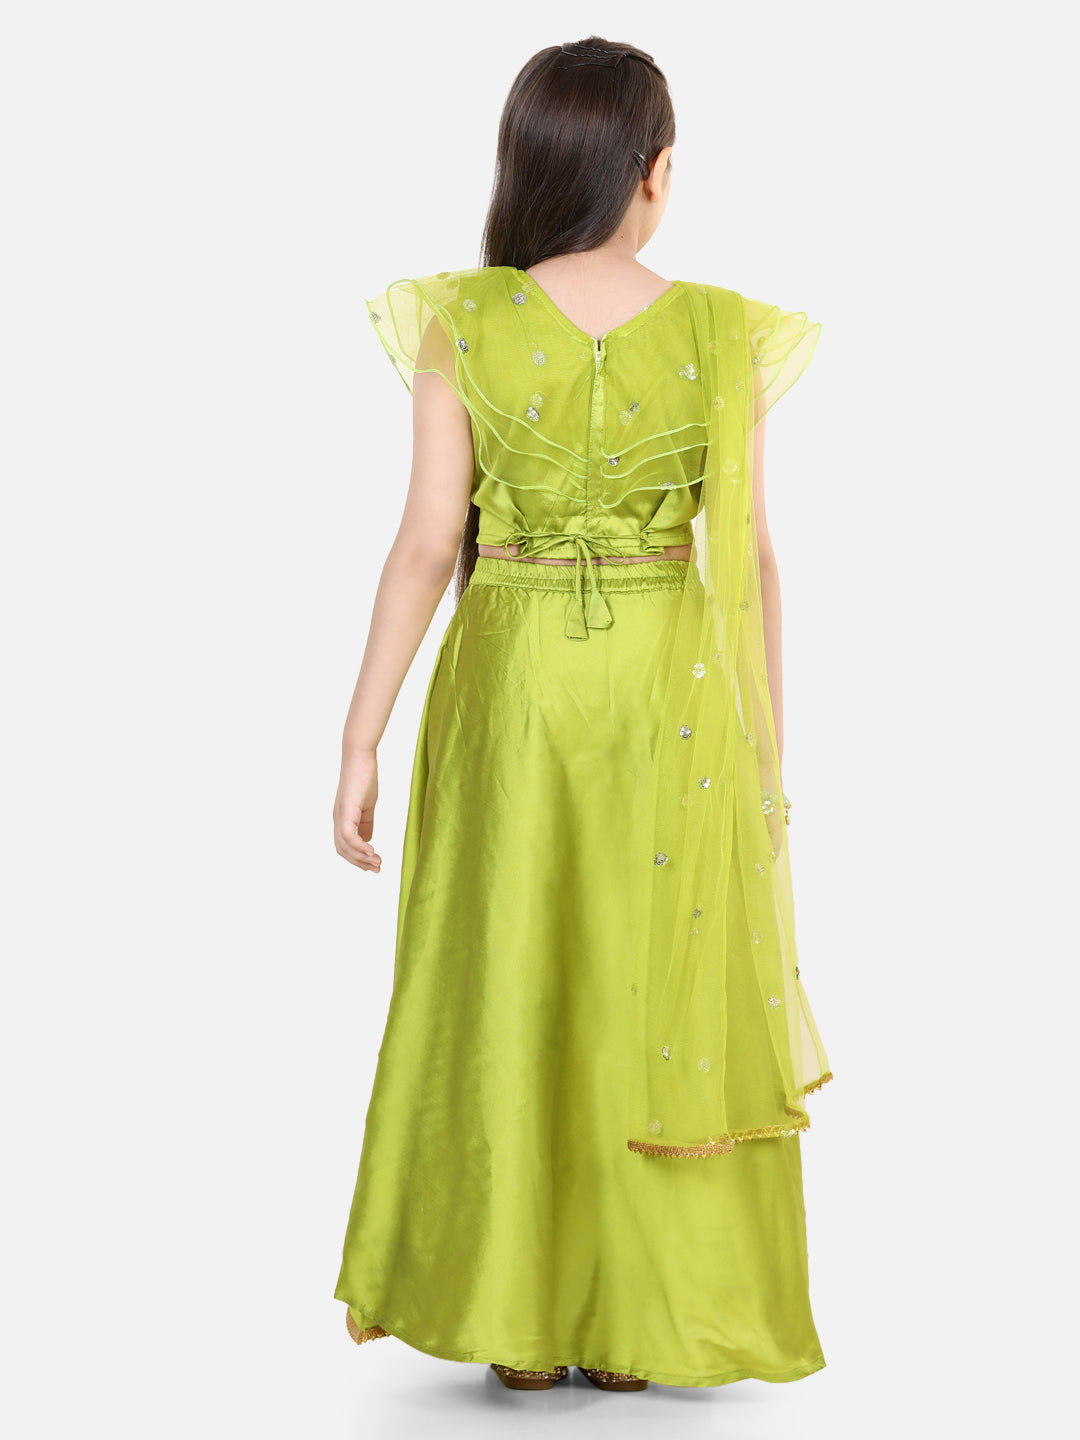 BownBee Lotus Embroidery Lehenga with Ruffle Sequin Top- Green